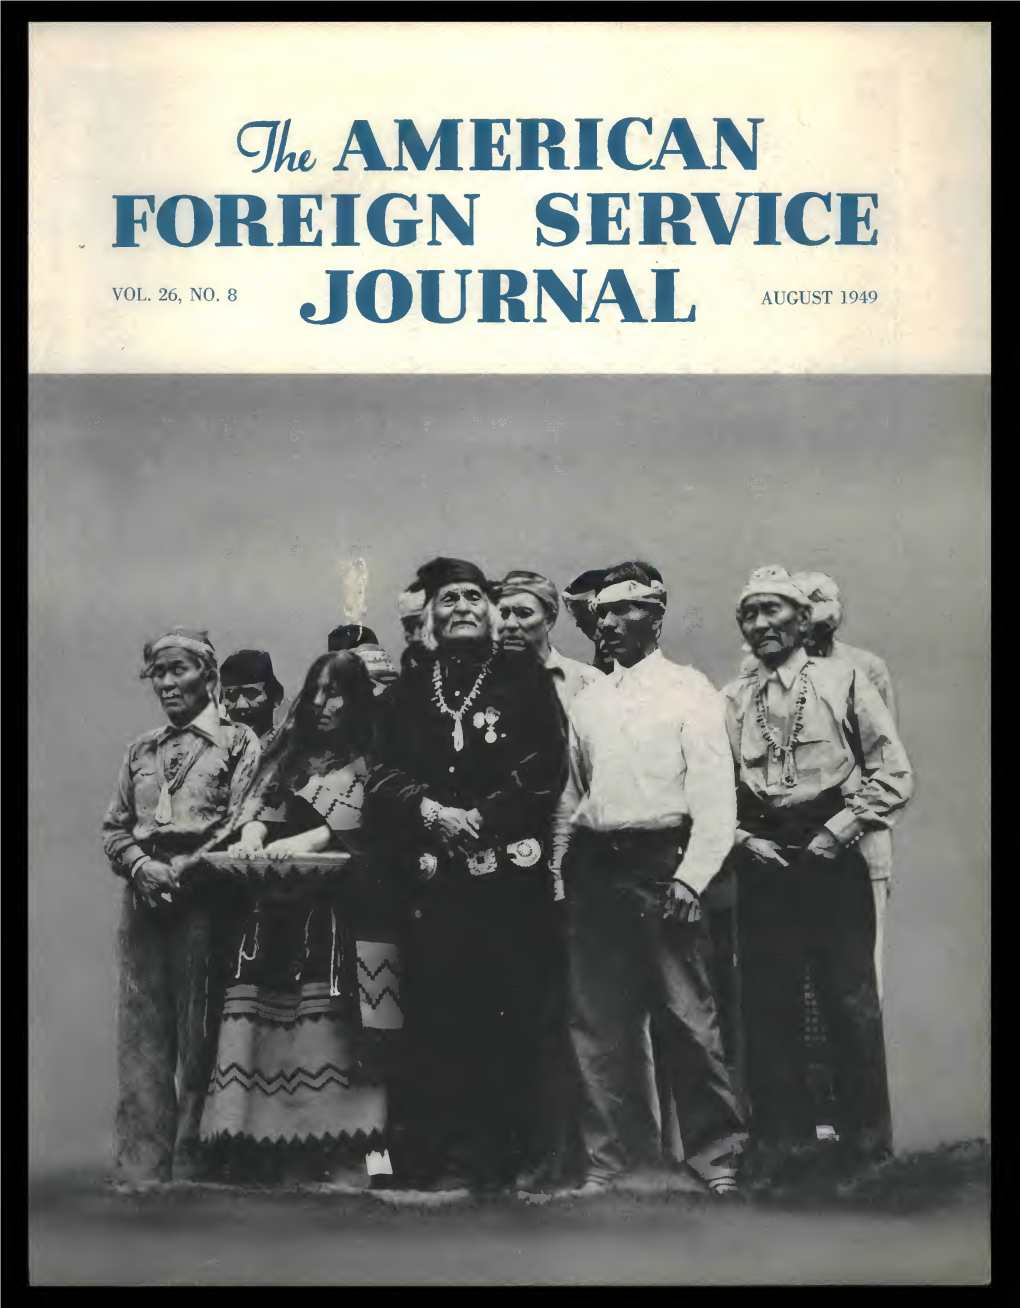 The Foreign Service Journal, August 1949